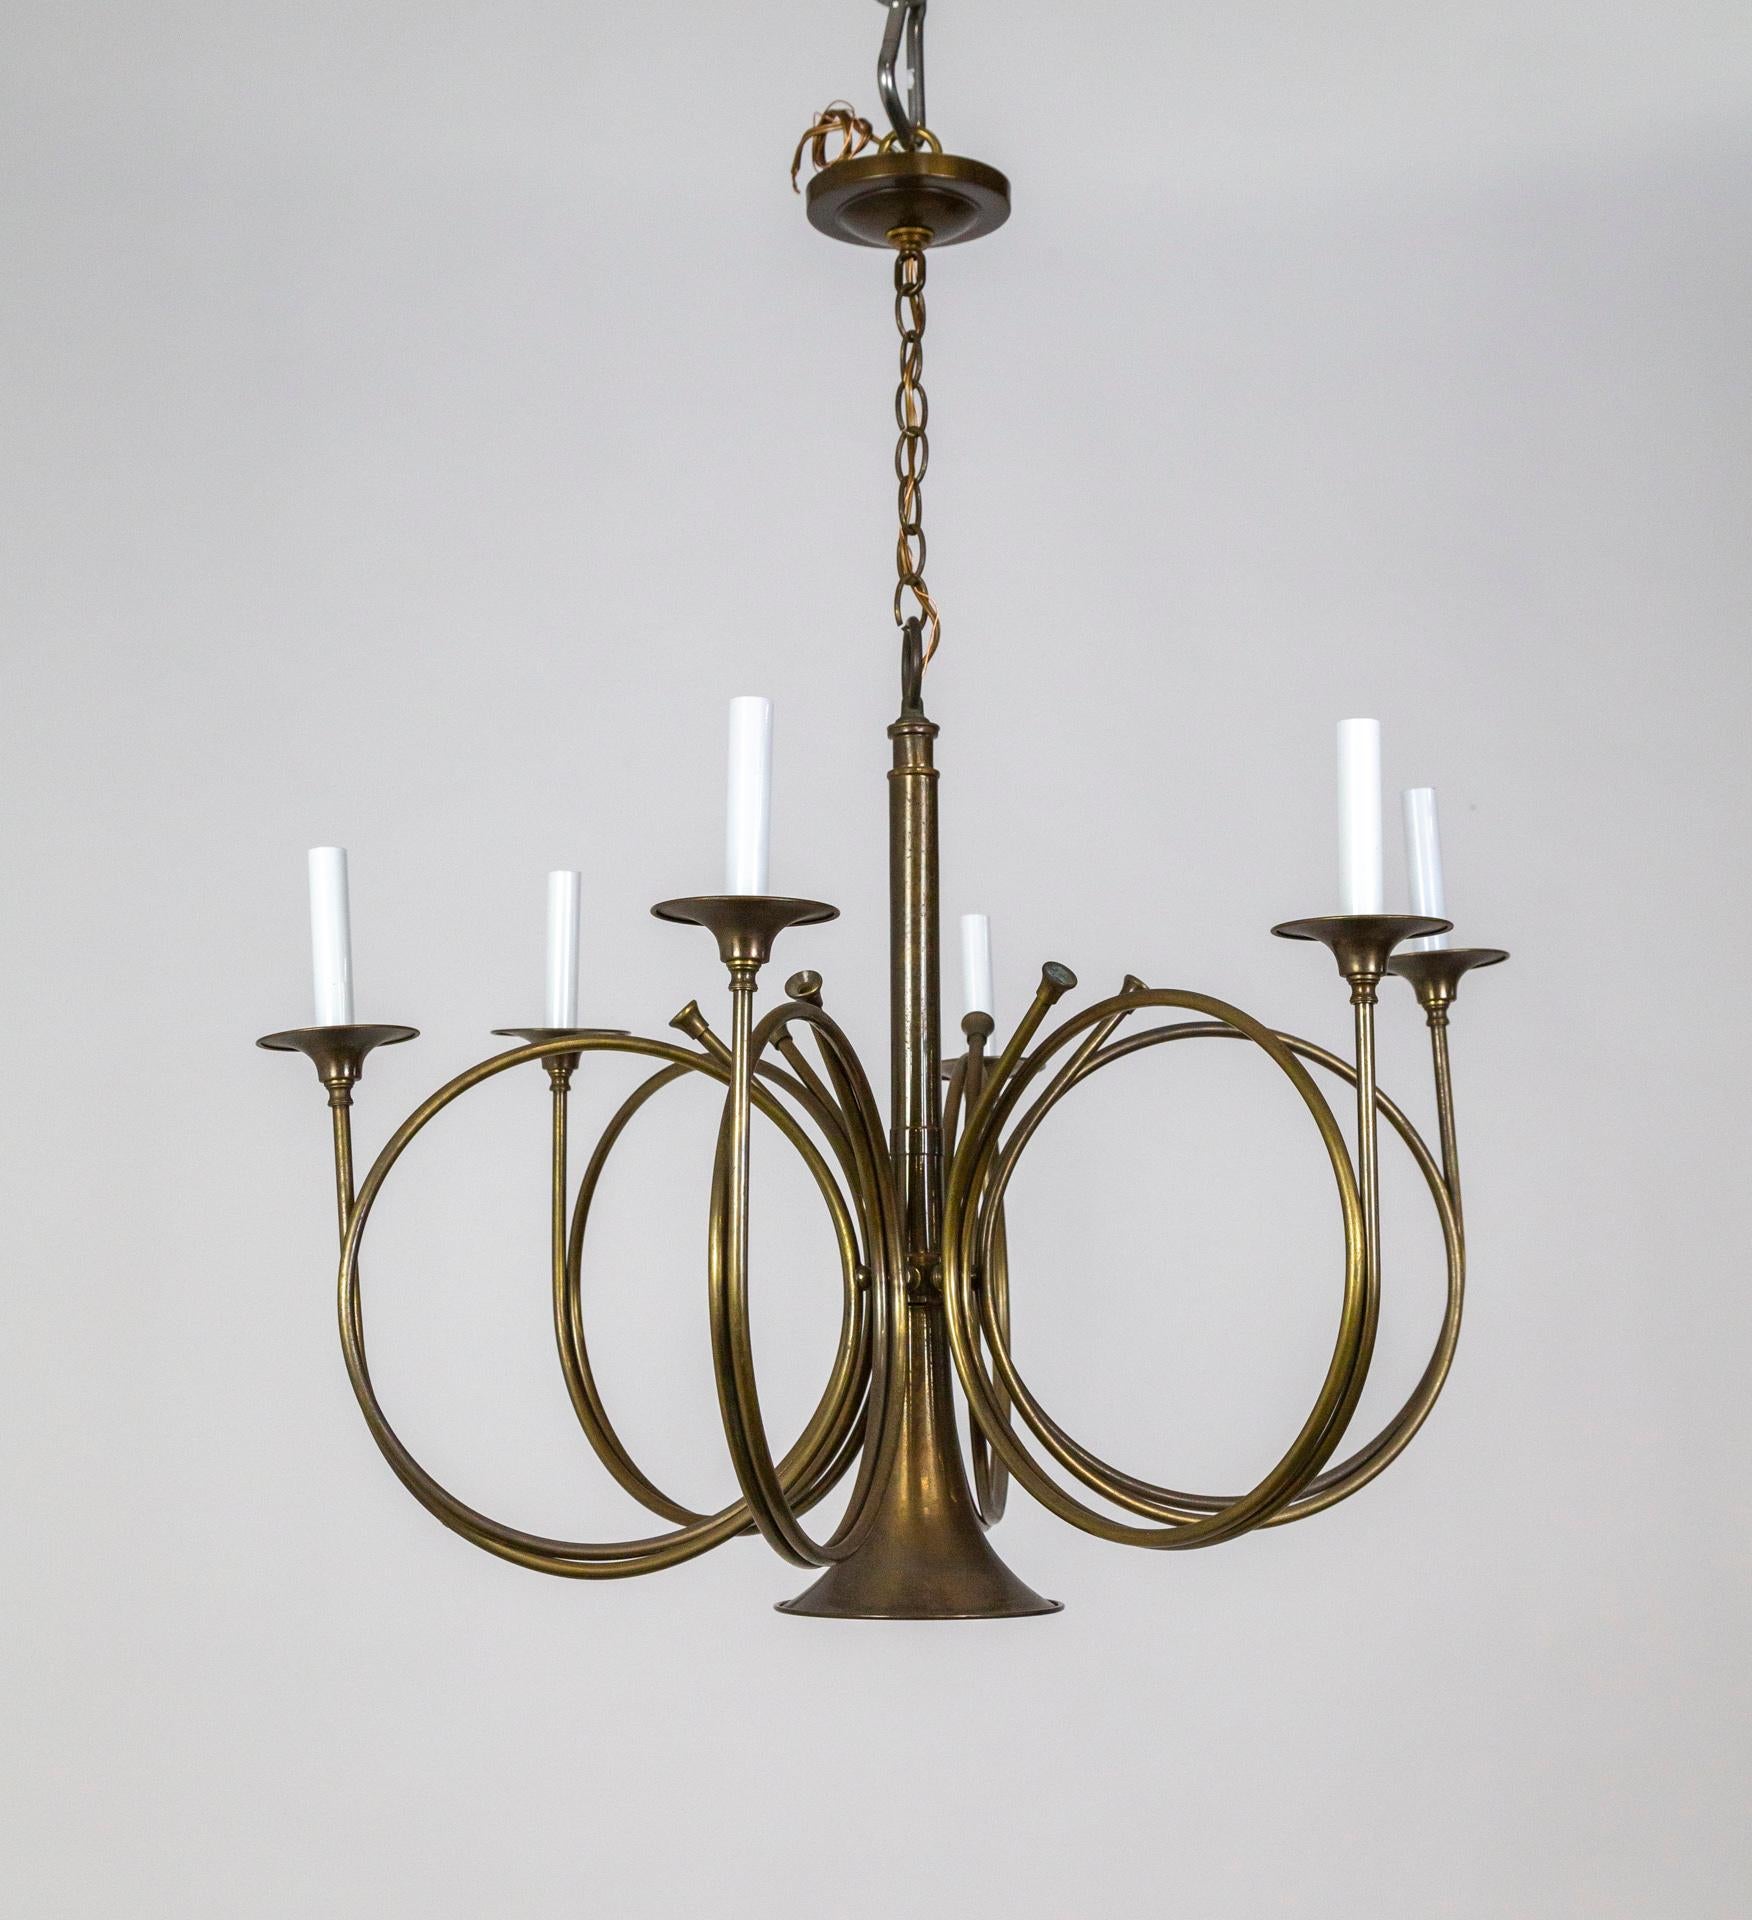 A patinated brass chandelier comprised of French hunting horns designed by Fredrick Cooper. Six arms curl out from the central horn form with up-lights, candlestick style, and the openings of the horns act as bobeches. There is one hidden downlight